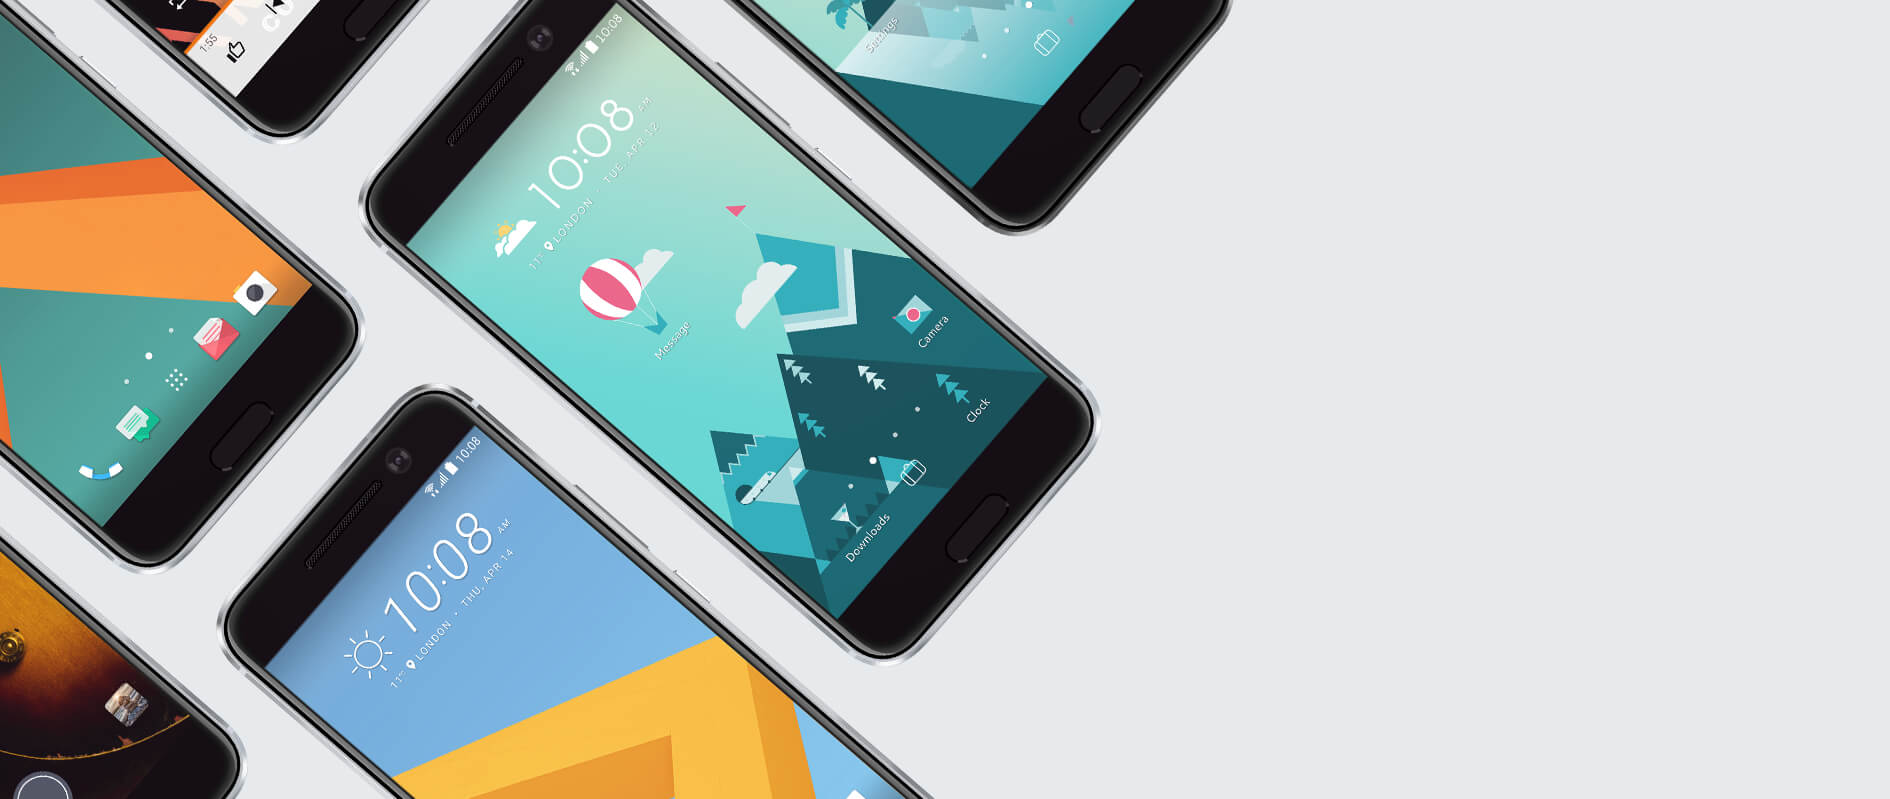 HTC 10 - Android Lollipop